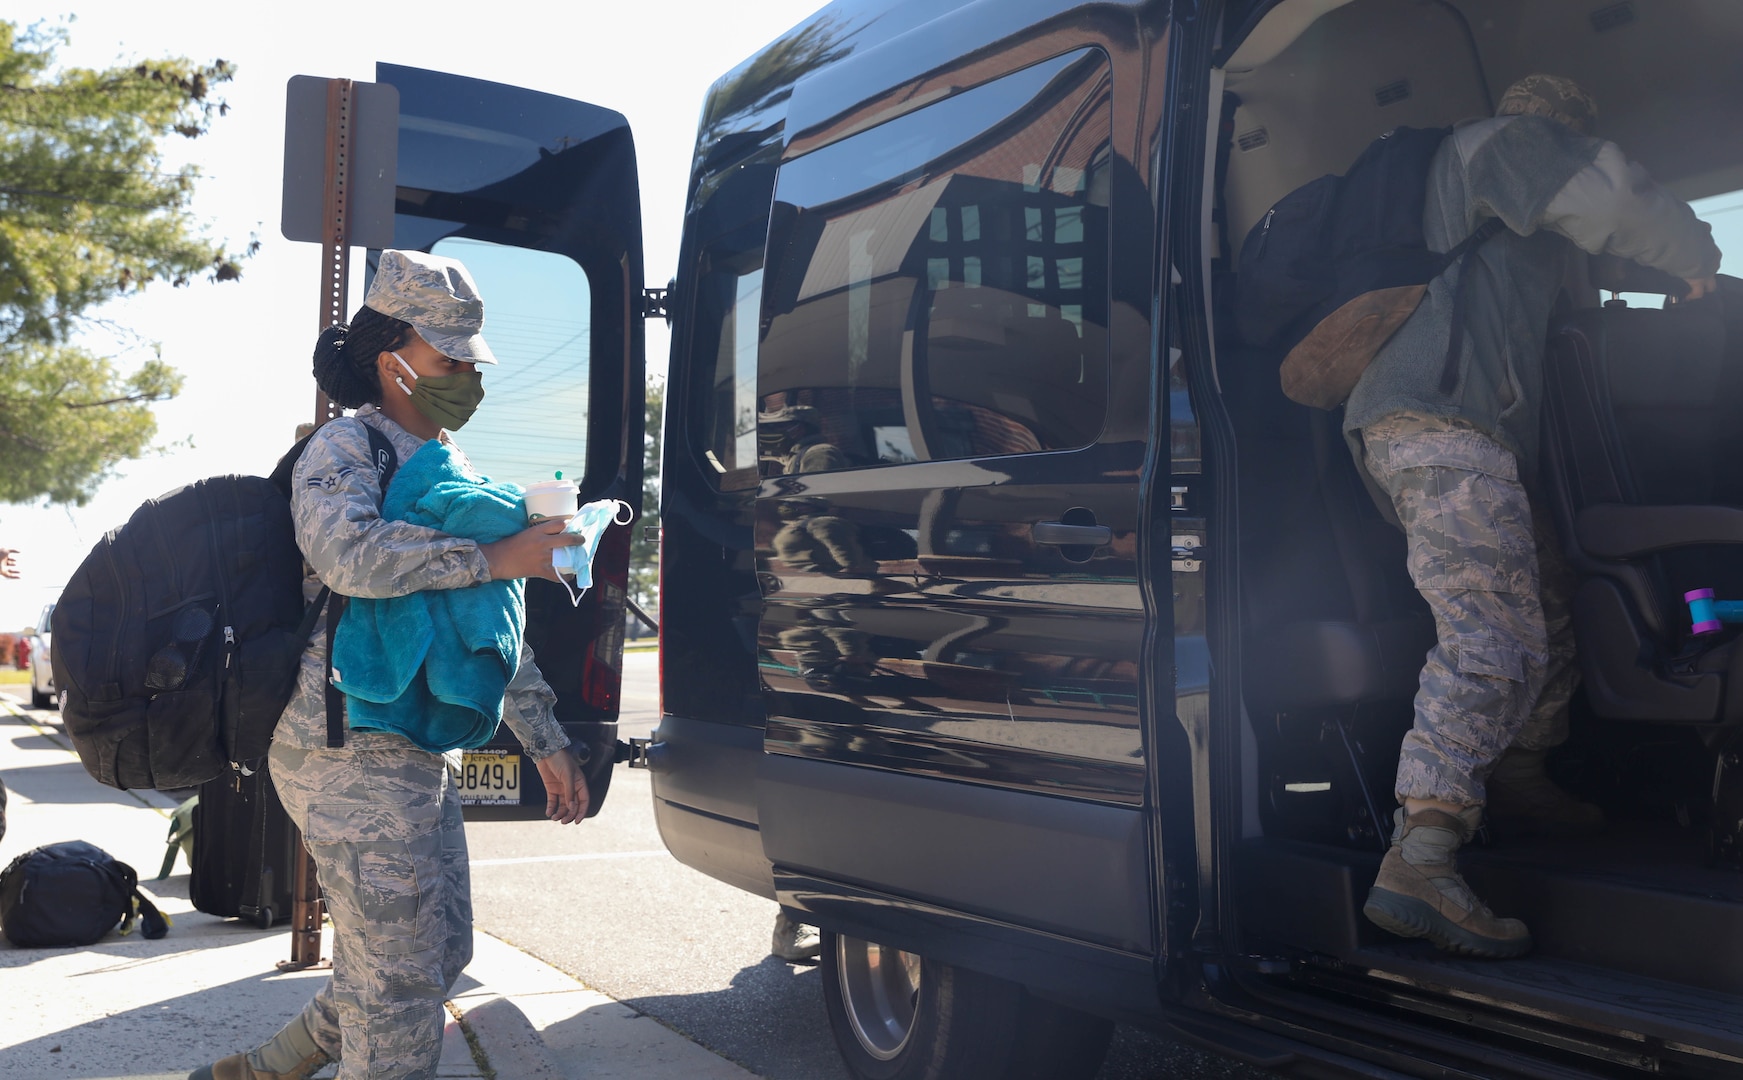 Airman 1st Class Tahlia Wilson, mental health technician, 59th Medical Group, Randolph Air Force Base, Texas, boards a van at Joint Base McGuire-Dix-Lakehurst, NJ, April 28, 2020. Wilson is a part of a six-member team that will provide behavioral health and support services to the service men and women that are provide care and medical services to COIVD-19 patients. U.S. Northern Command, through U.S. Army North, is providing military support to the Federal Emergency Management Agency to help communities in need. (U.S. Army photo by Sgt. Aimee Nordin)